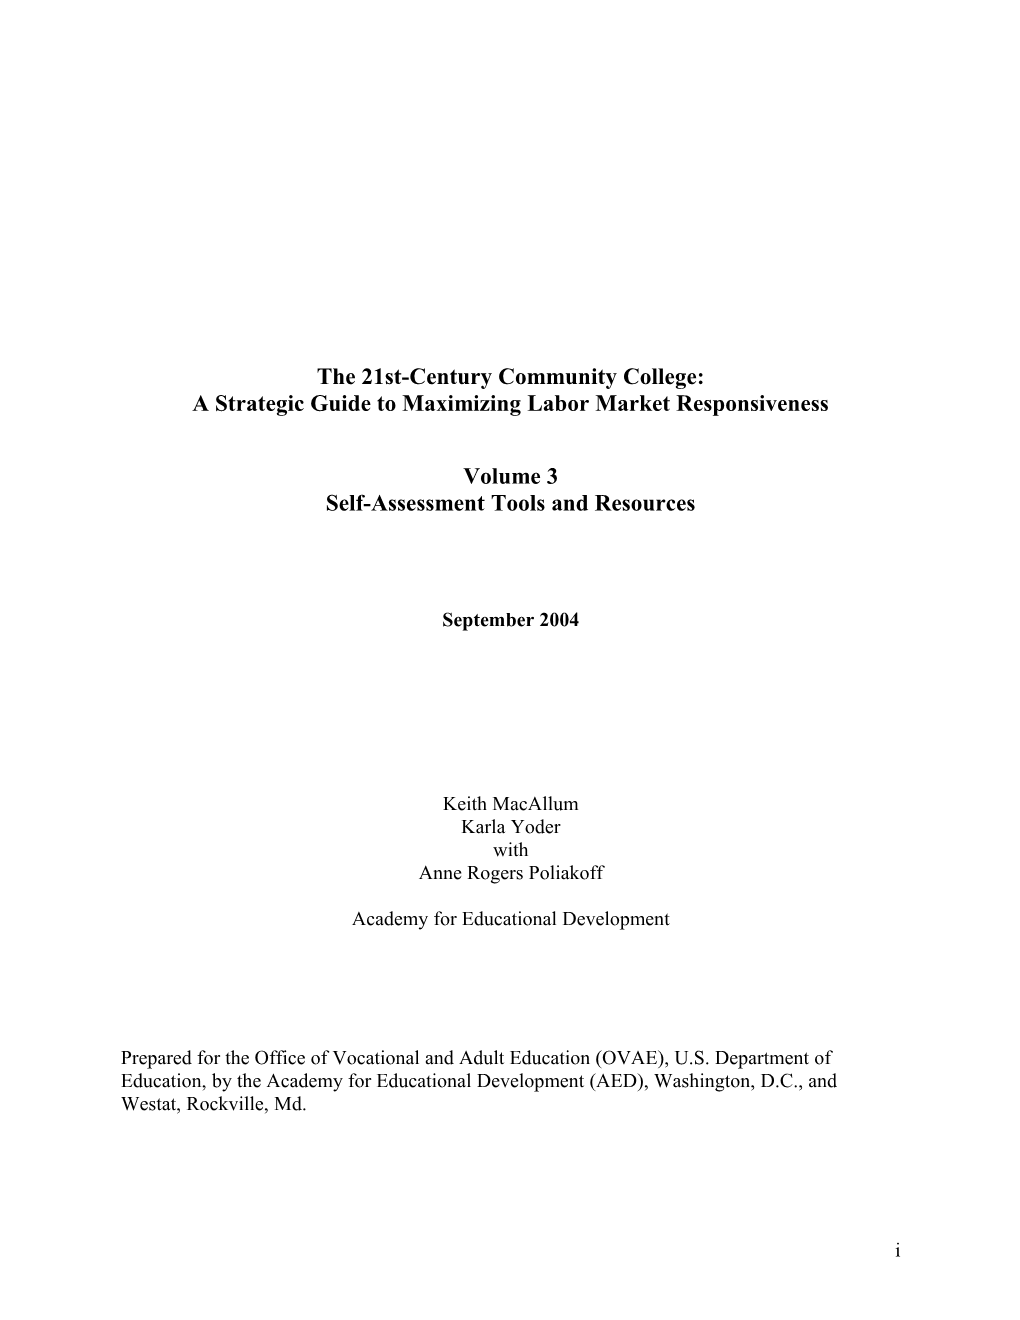 The 21St-Century Community College: a Strategic Guide to Maximizing Labor Market Responsiveness